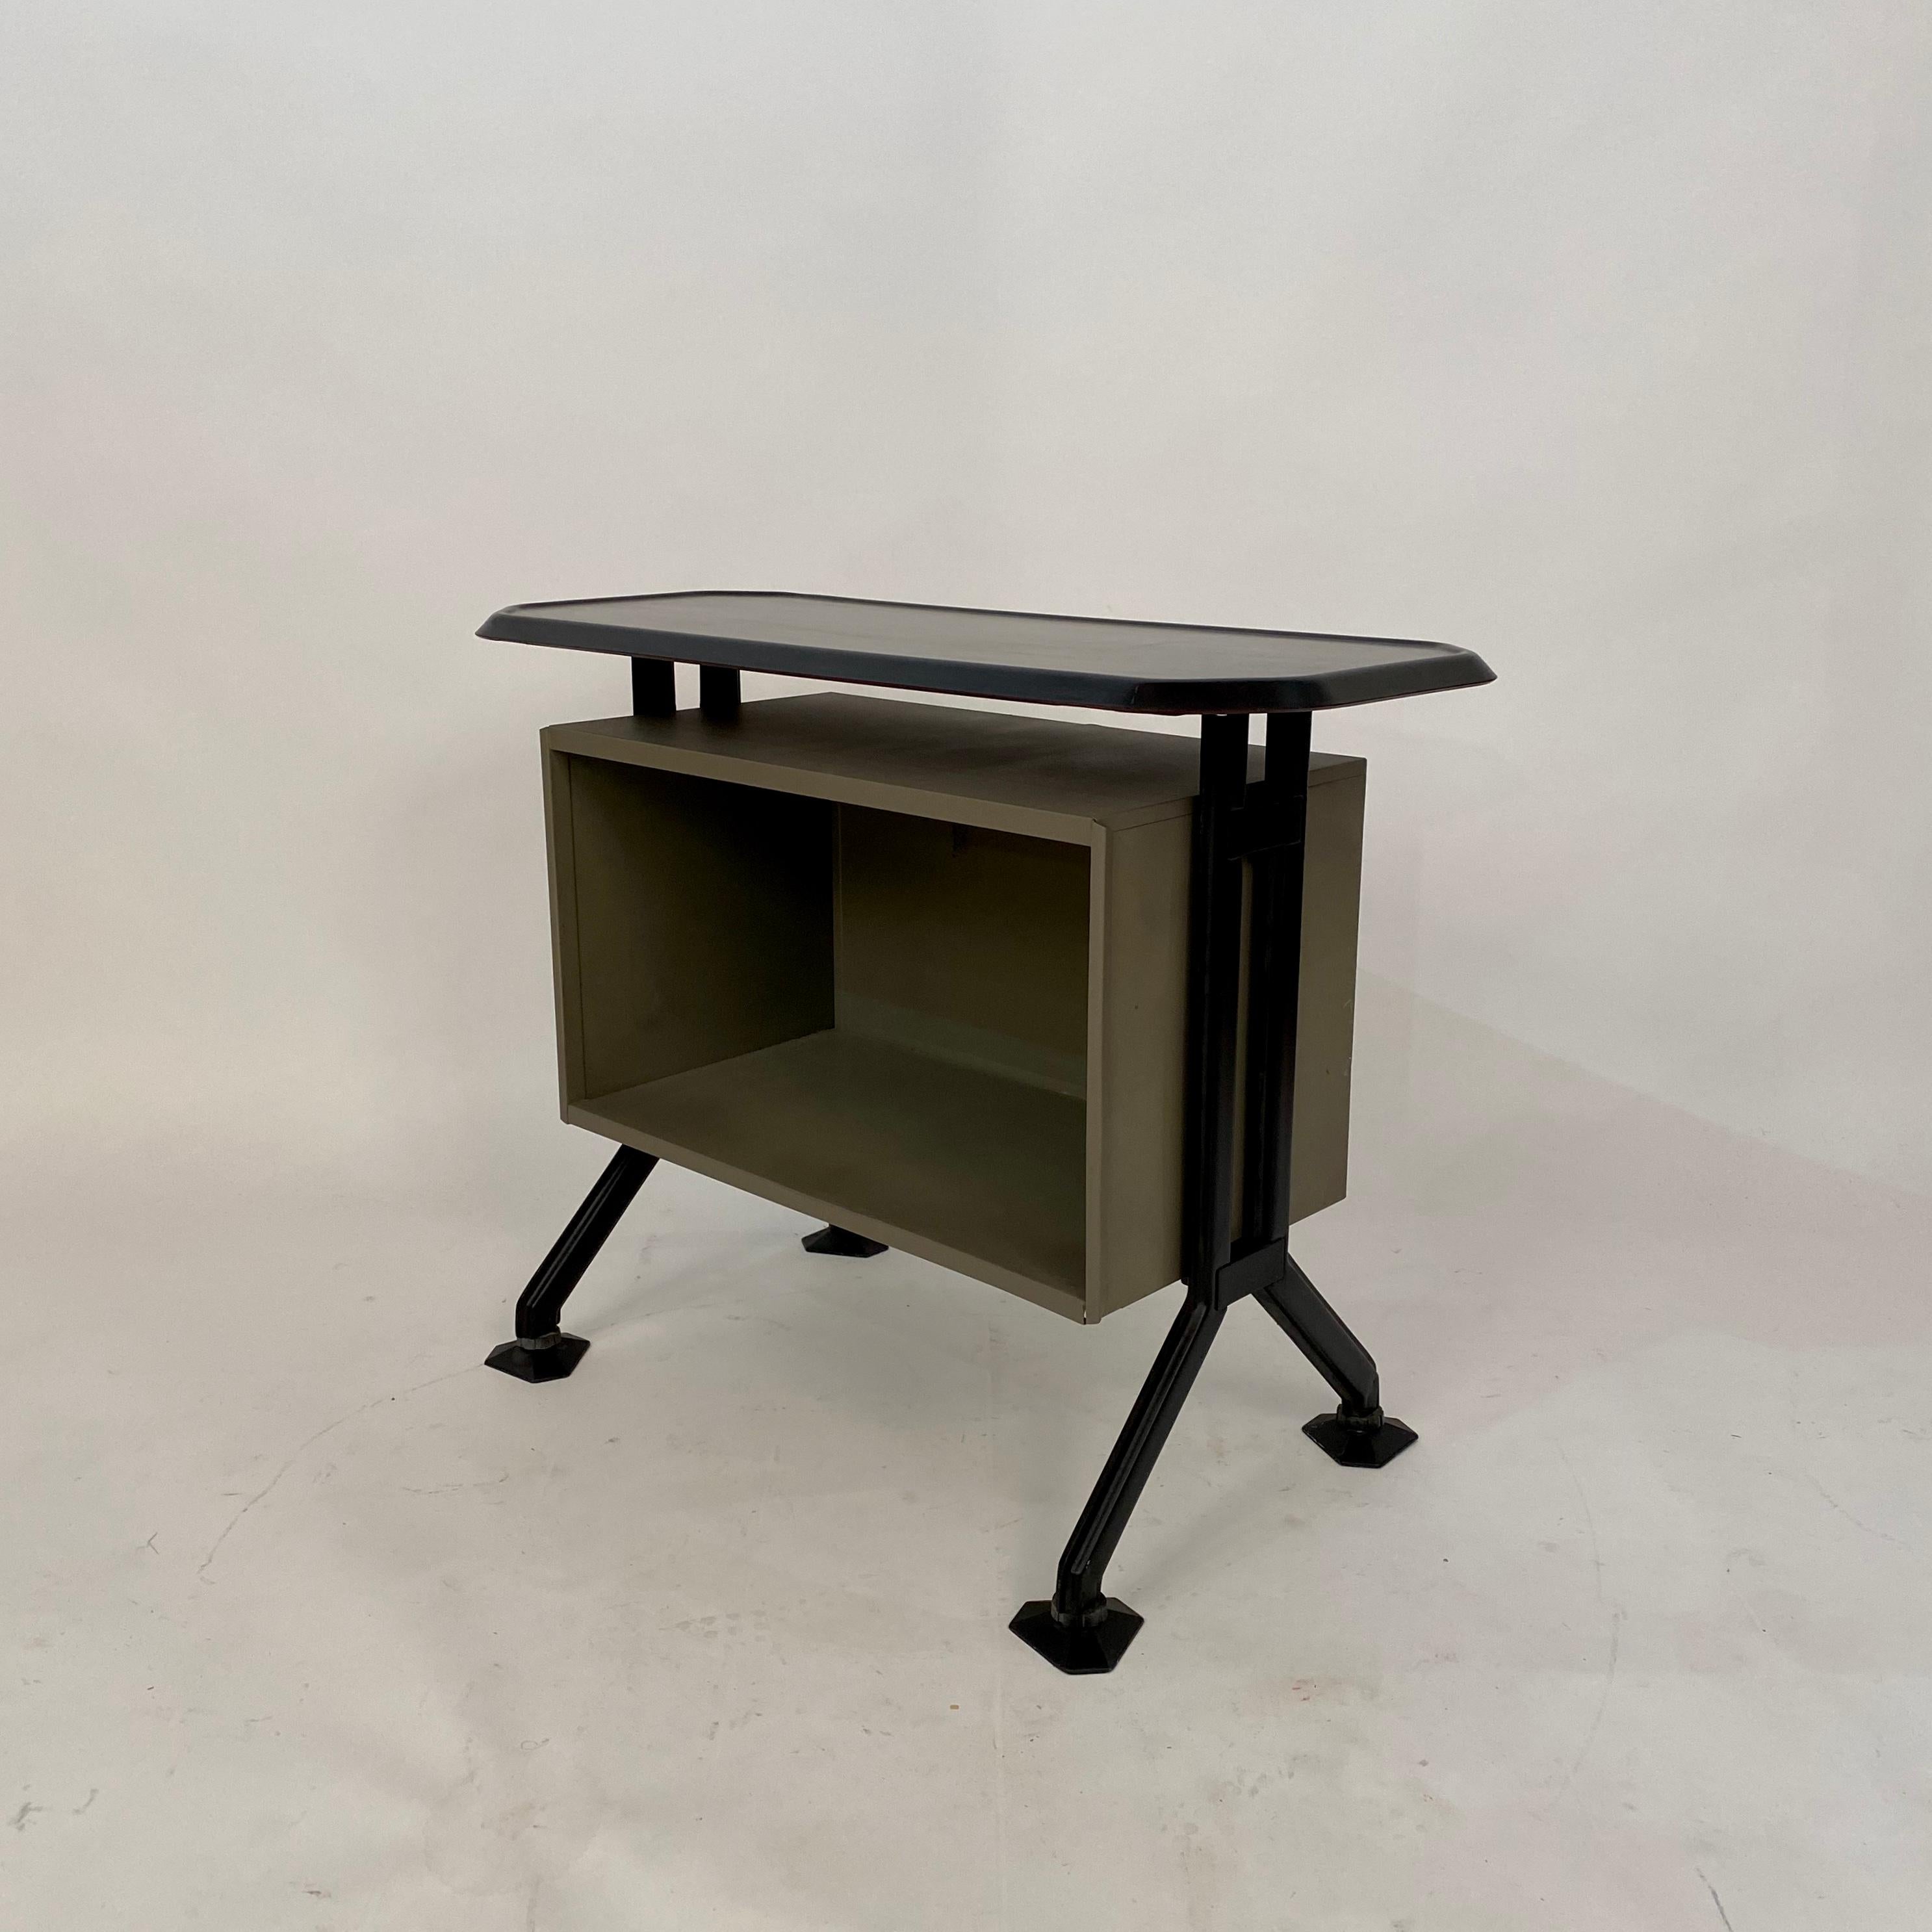 This midcentury sideboard or office cabinet was designed by B.B.P.R. for Olivetti in Italy circa 1963. It is from the Arco Series.
It is made out of lacquered metal, plastic and pressed pear wood.
A unique piece which is a great eye-catcher for